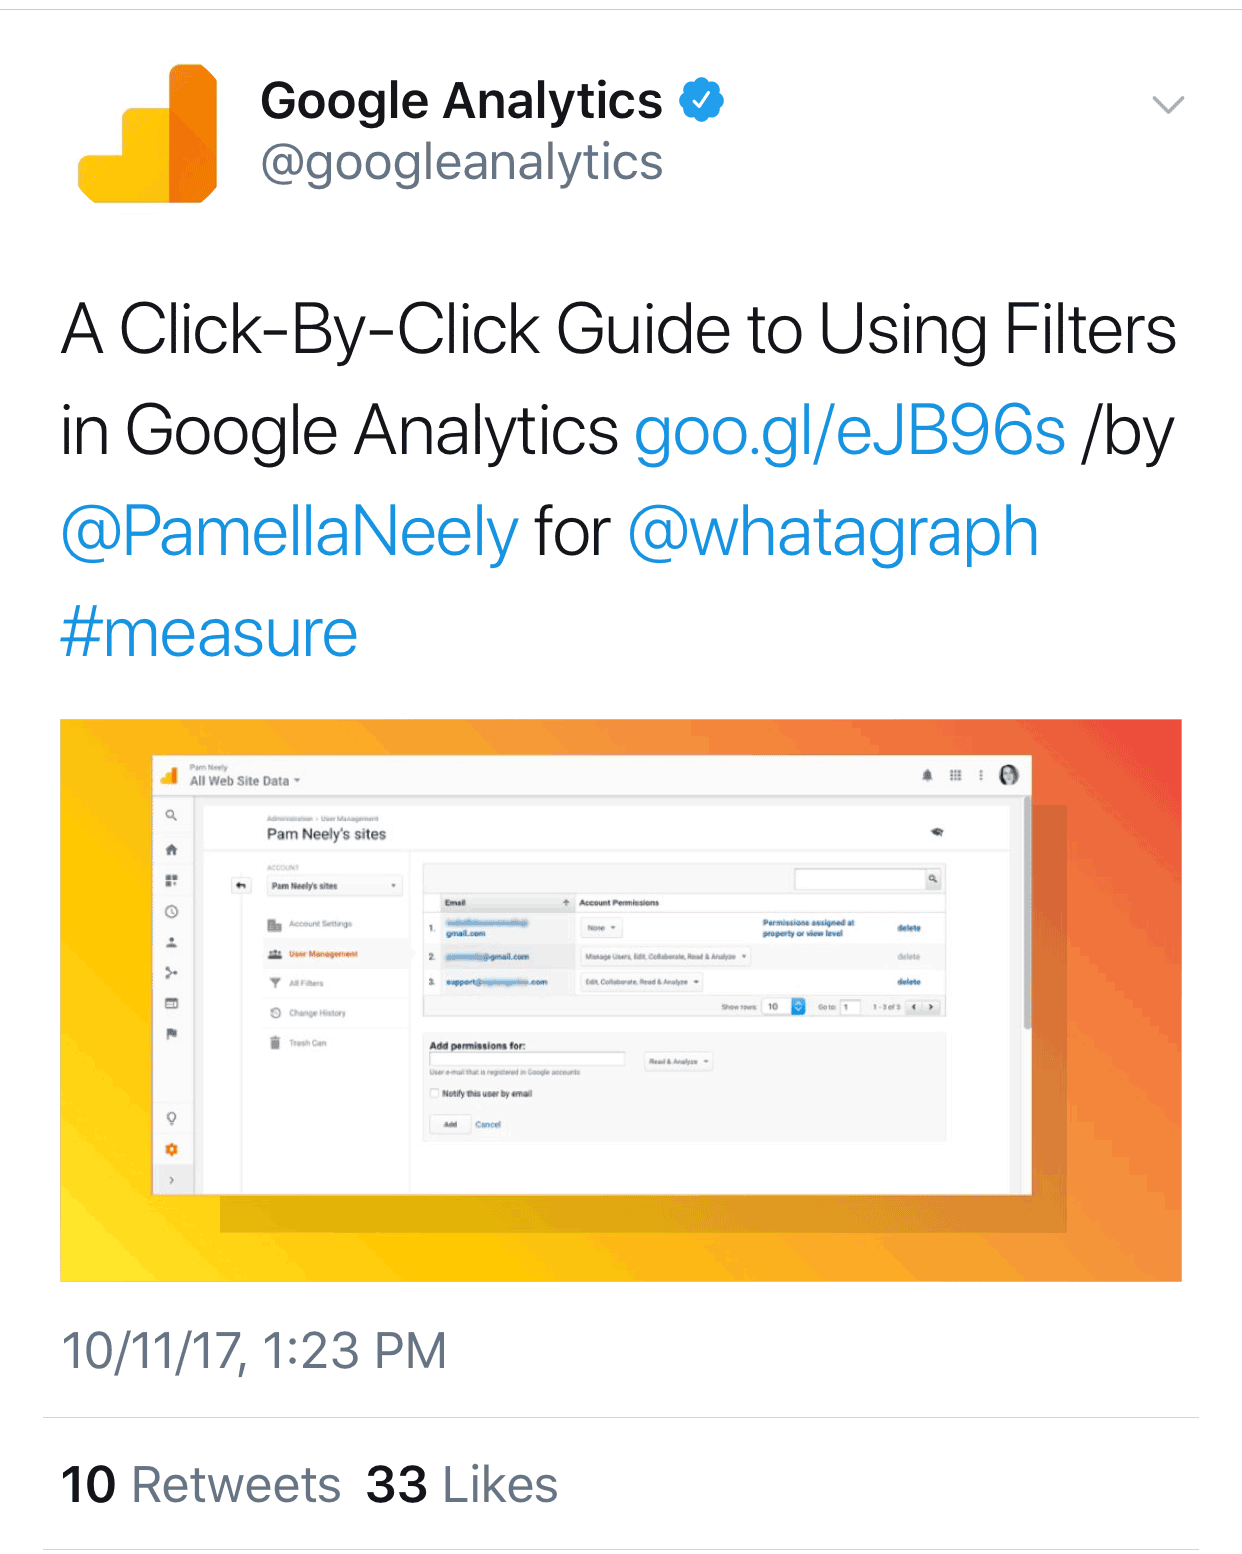 one of my biggest wins as a freelance content creator: The official Google Analytics account shares my content